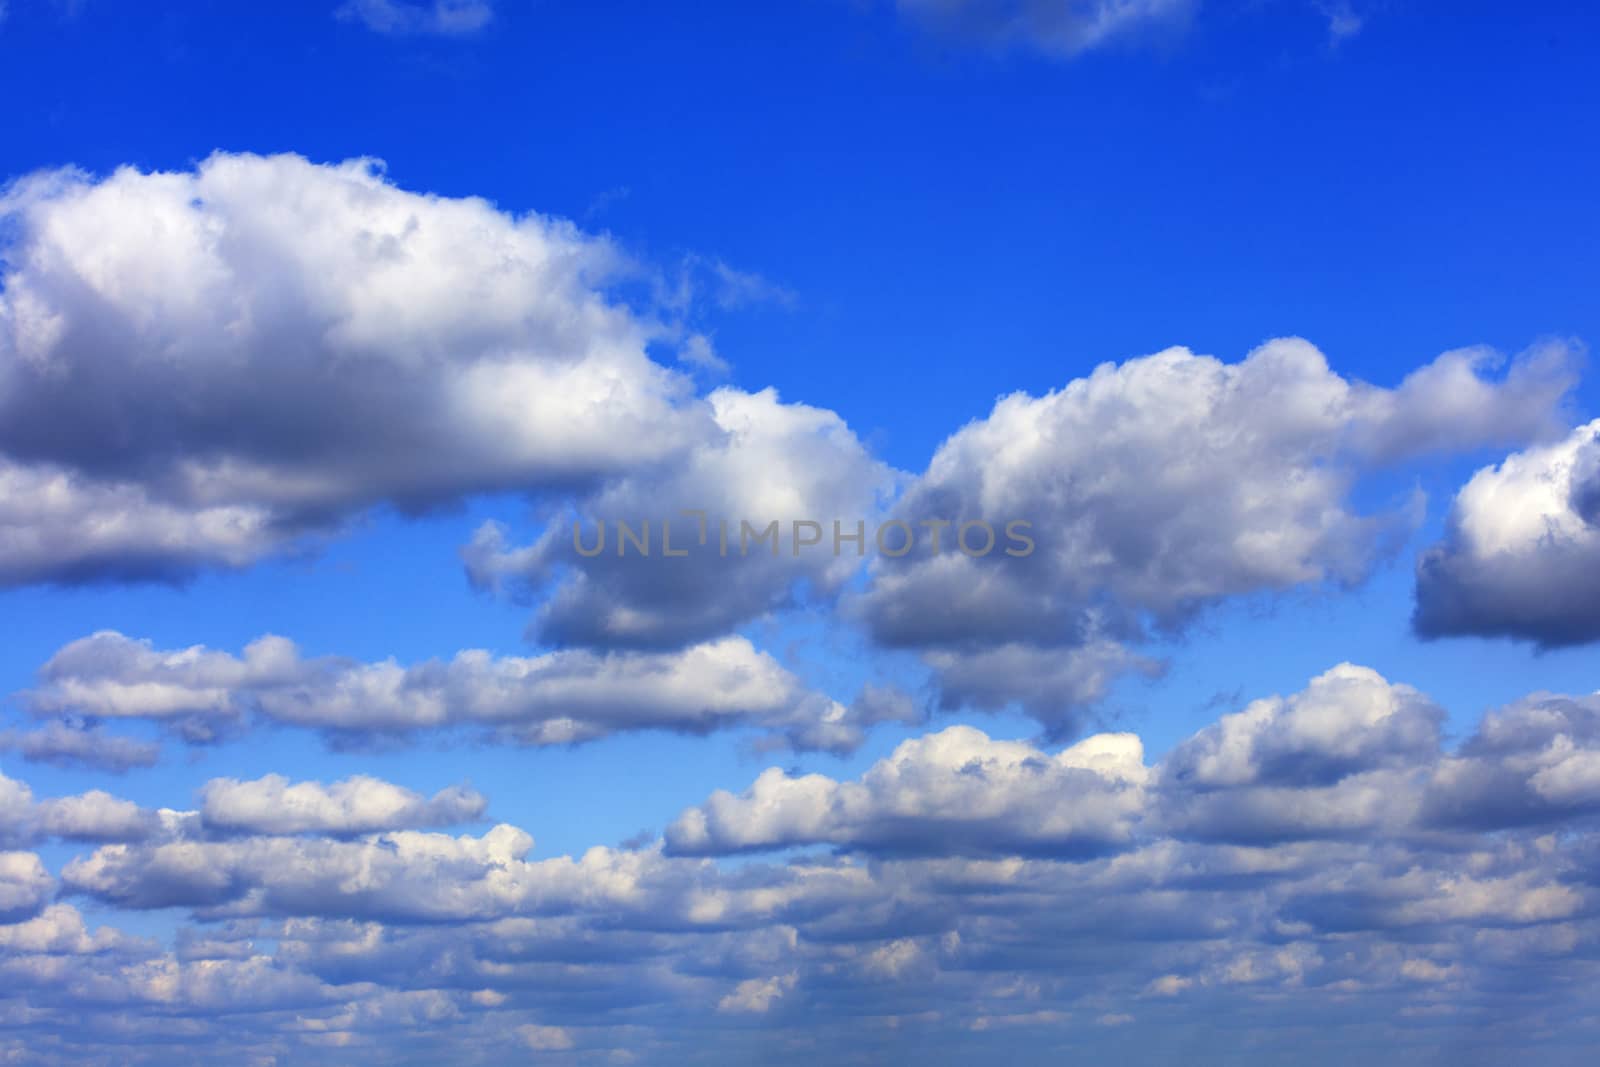 A background of blue saturated sky with the texture of white, gray and lead fluffy clouds covering it to the horizon.